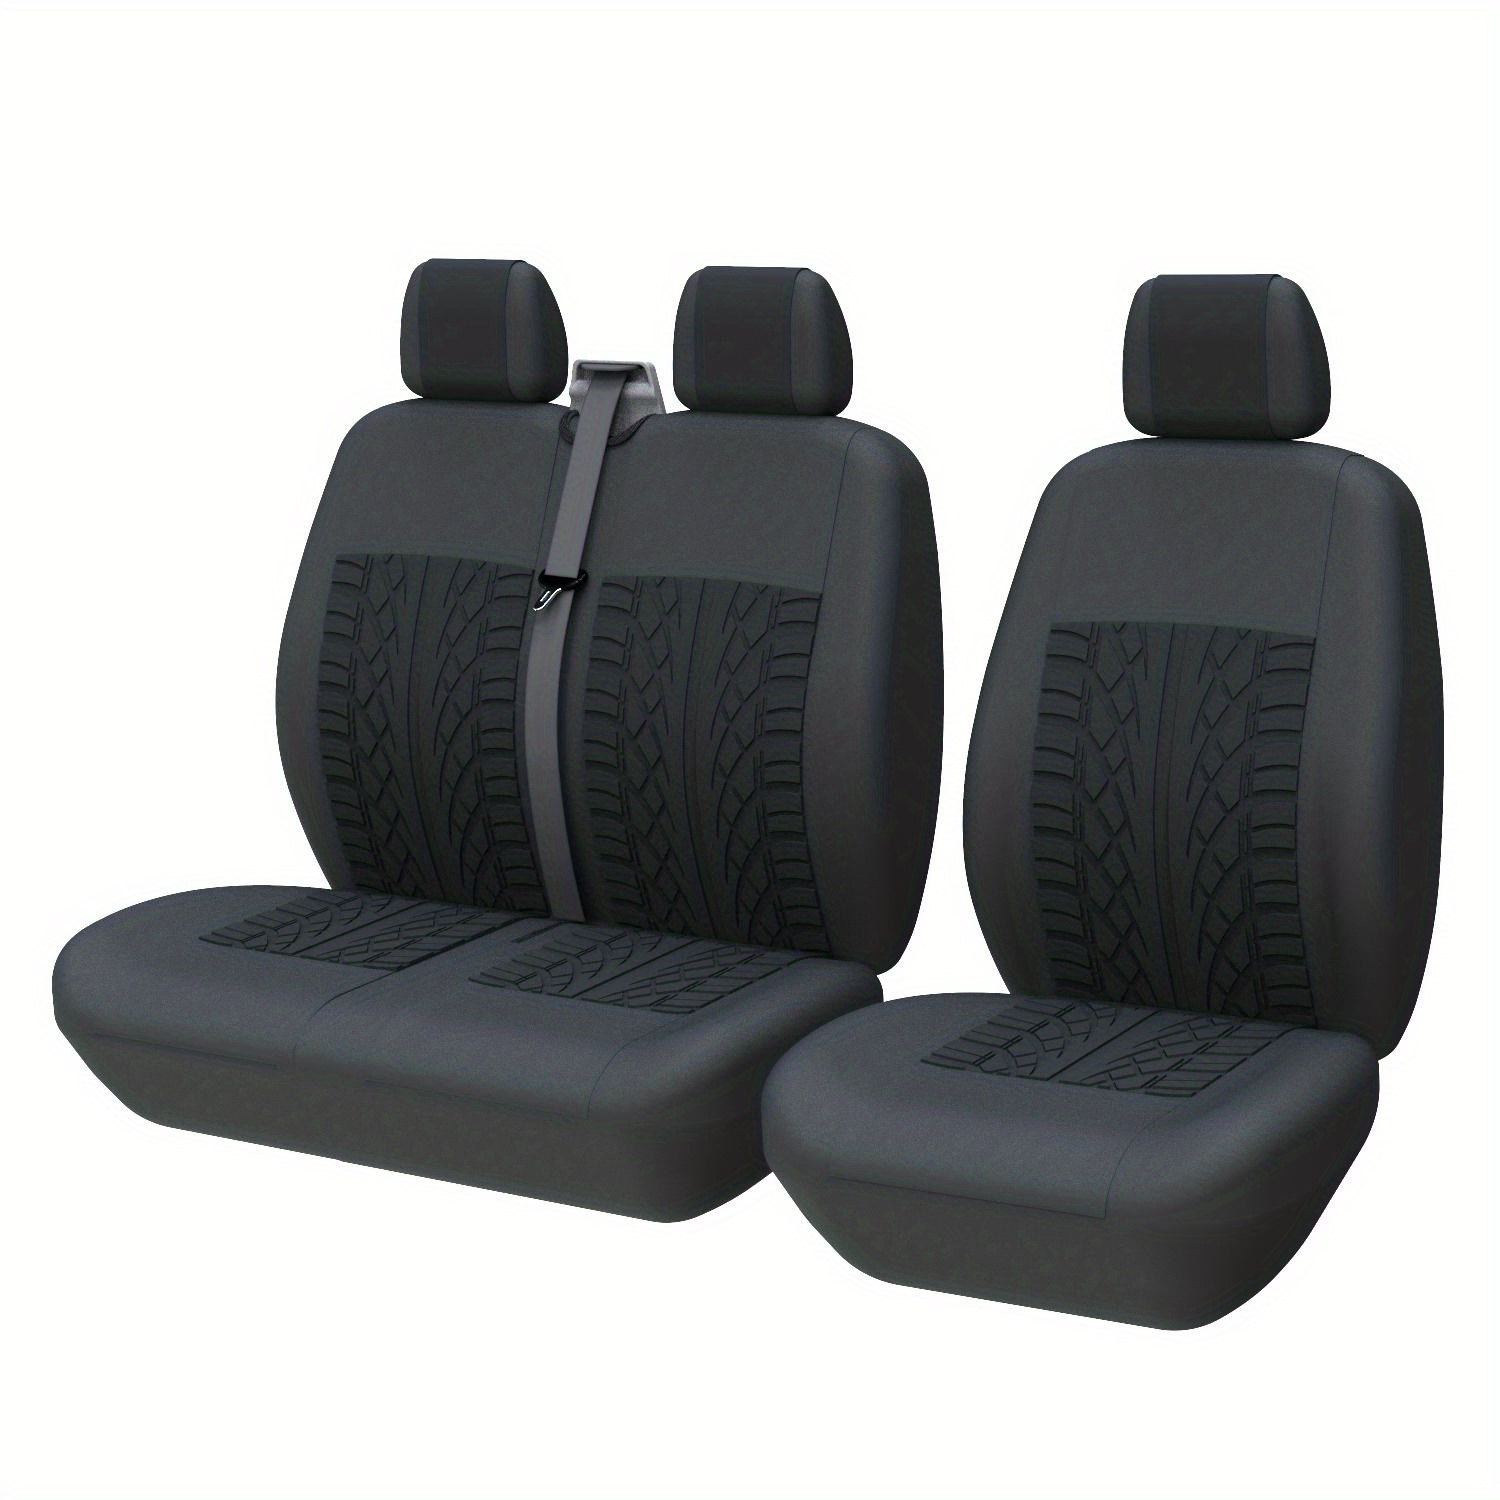 1 2 seat covers seat cover for transporter for ford transit van truck lorry for renault for peugeot for   details 2